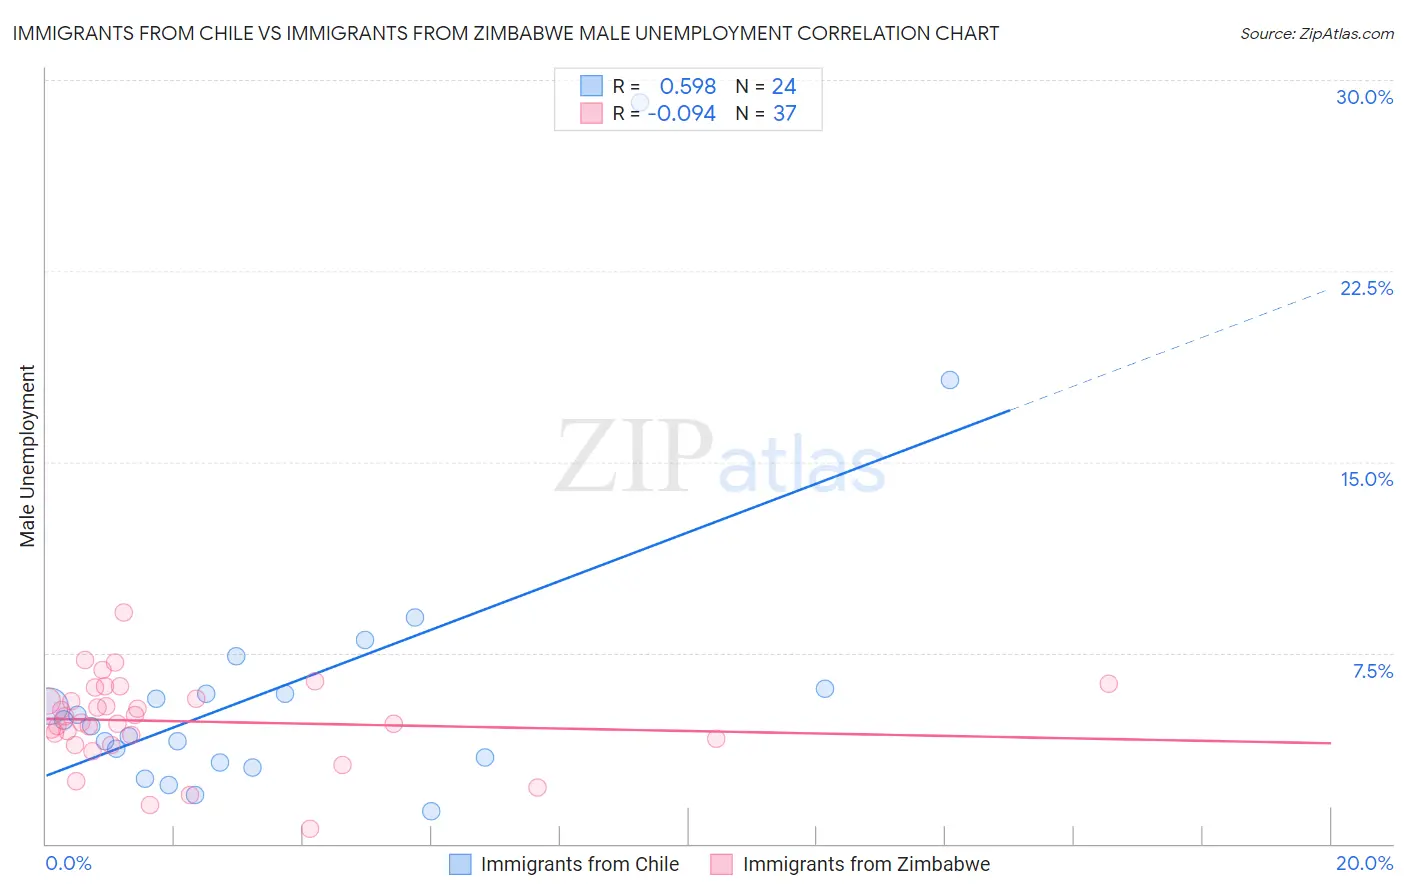 Immigrants from Chile vs Immigrants from Zimbabwe Male Unemployment